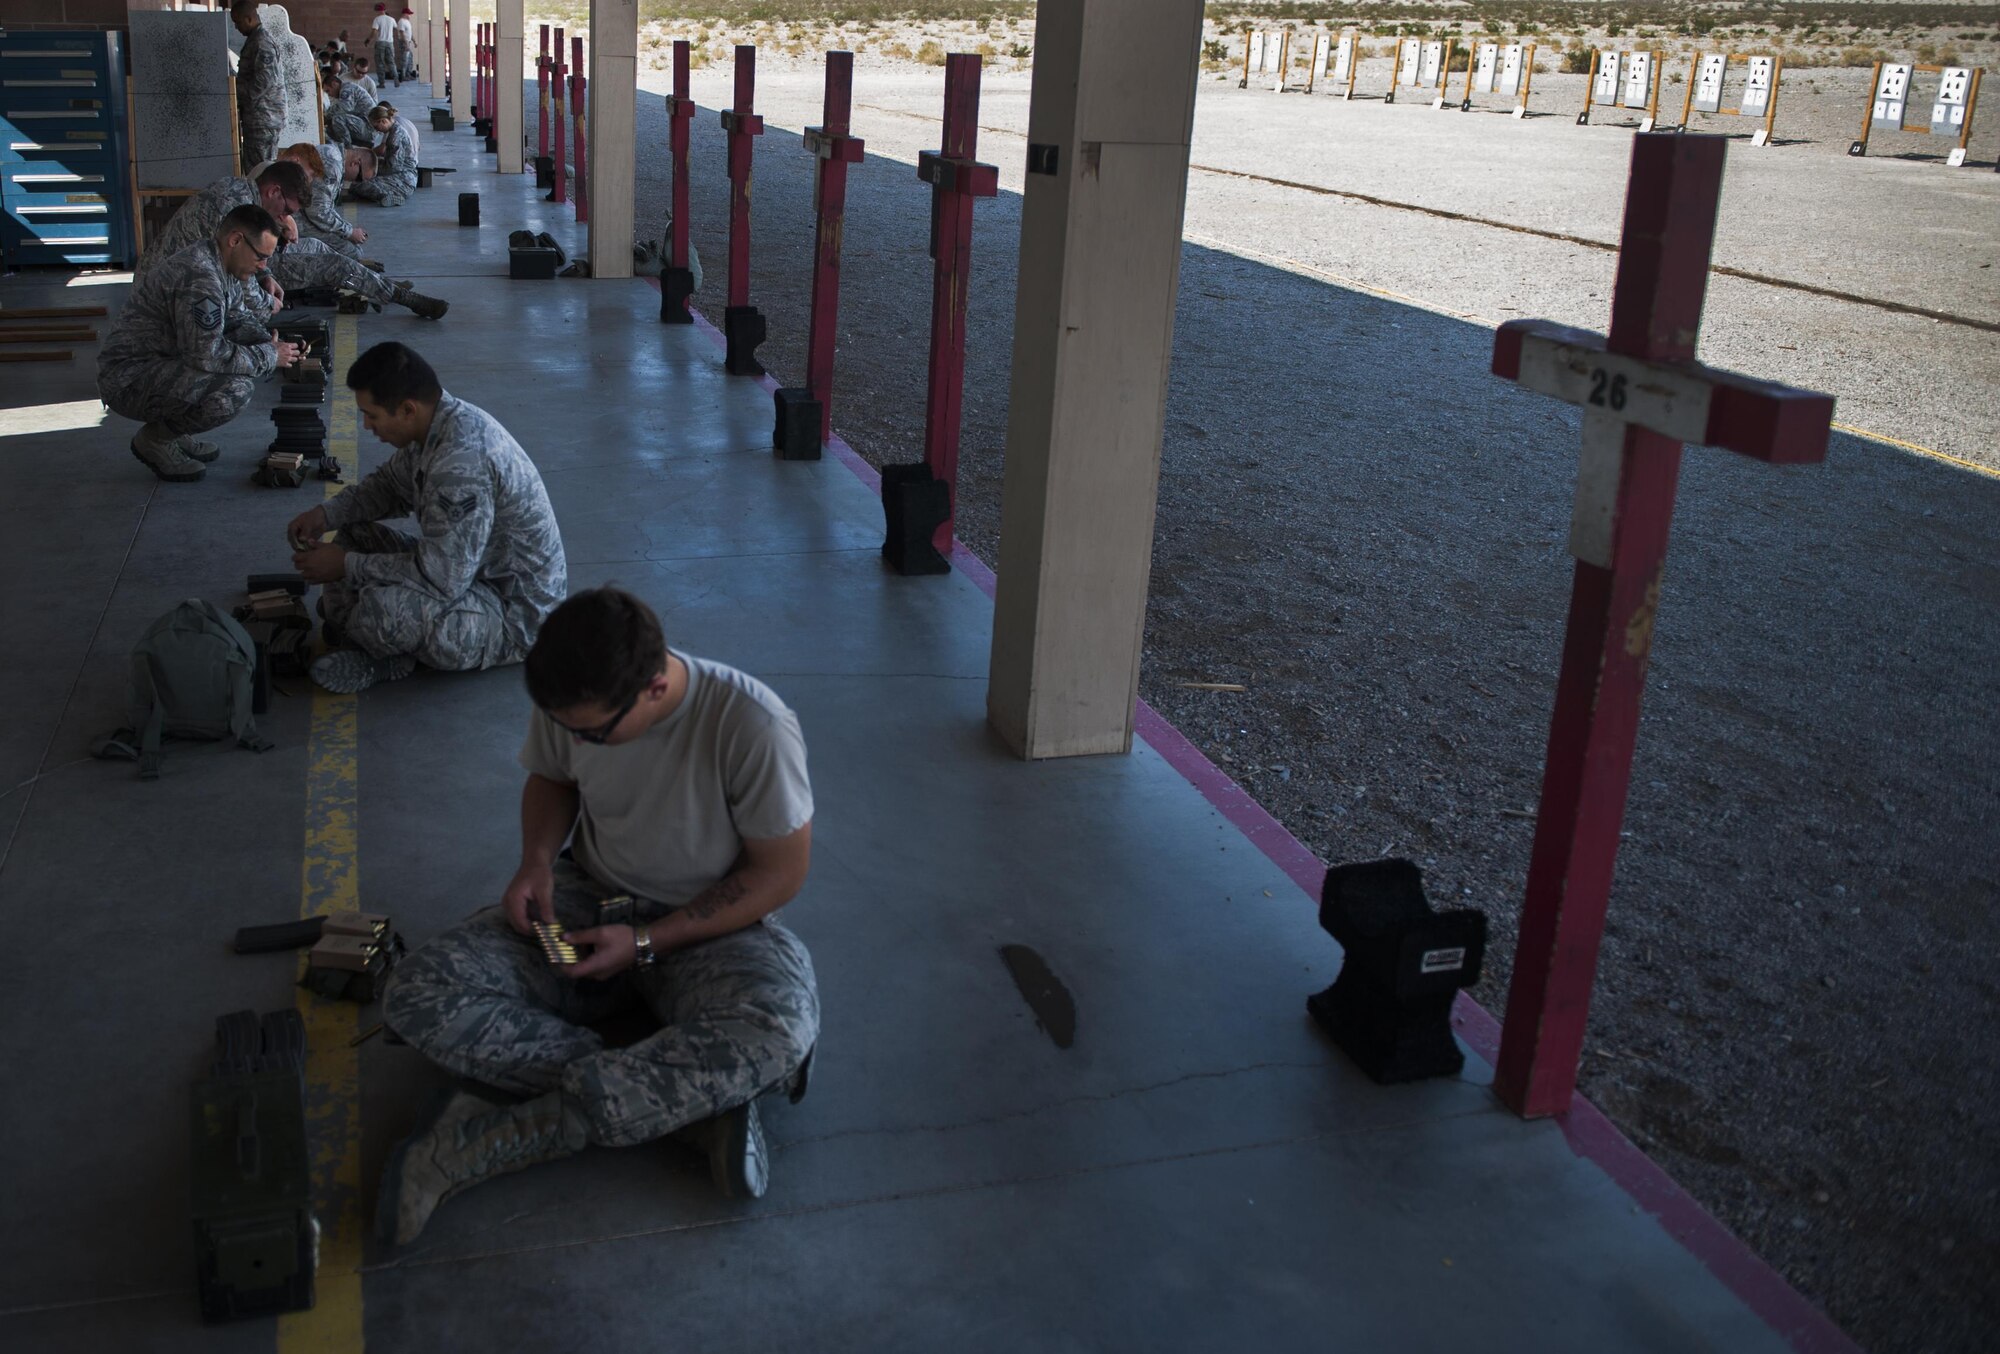 Airmen load ammunition during the 99th Security Force Squadron Combat Arms Training and Maintenance M4 carbine class on Nellis Air Force Base, Nev., Oct. 25, 2016. The 99th SFS CATM offer a wide variety of weapons classes, to prepare deploying Airmen for whatever real world scenario that may be ahead of them. (U.S. Air Force photo by Airman 1st Class Kevin Tanenbaum/Released)